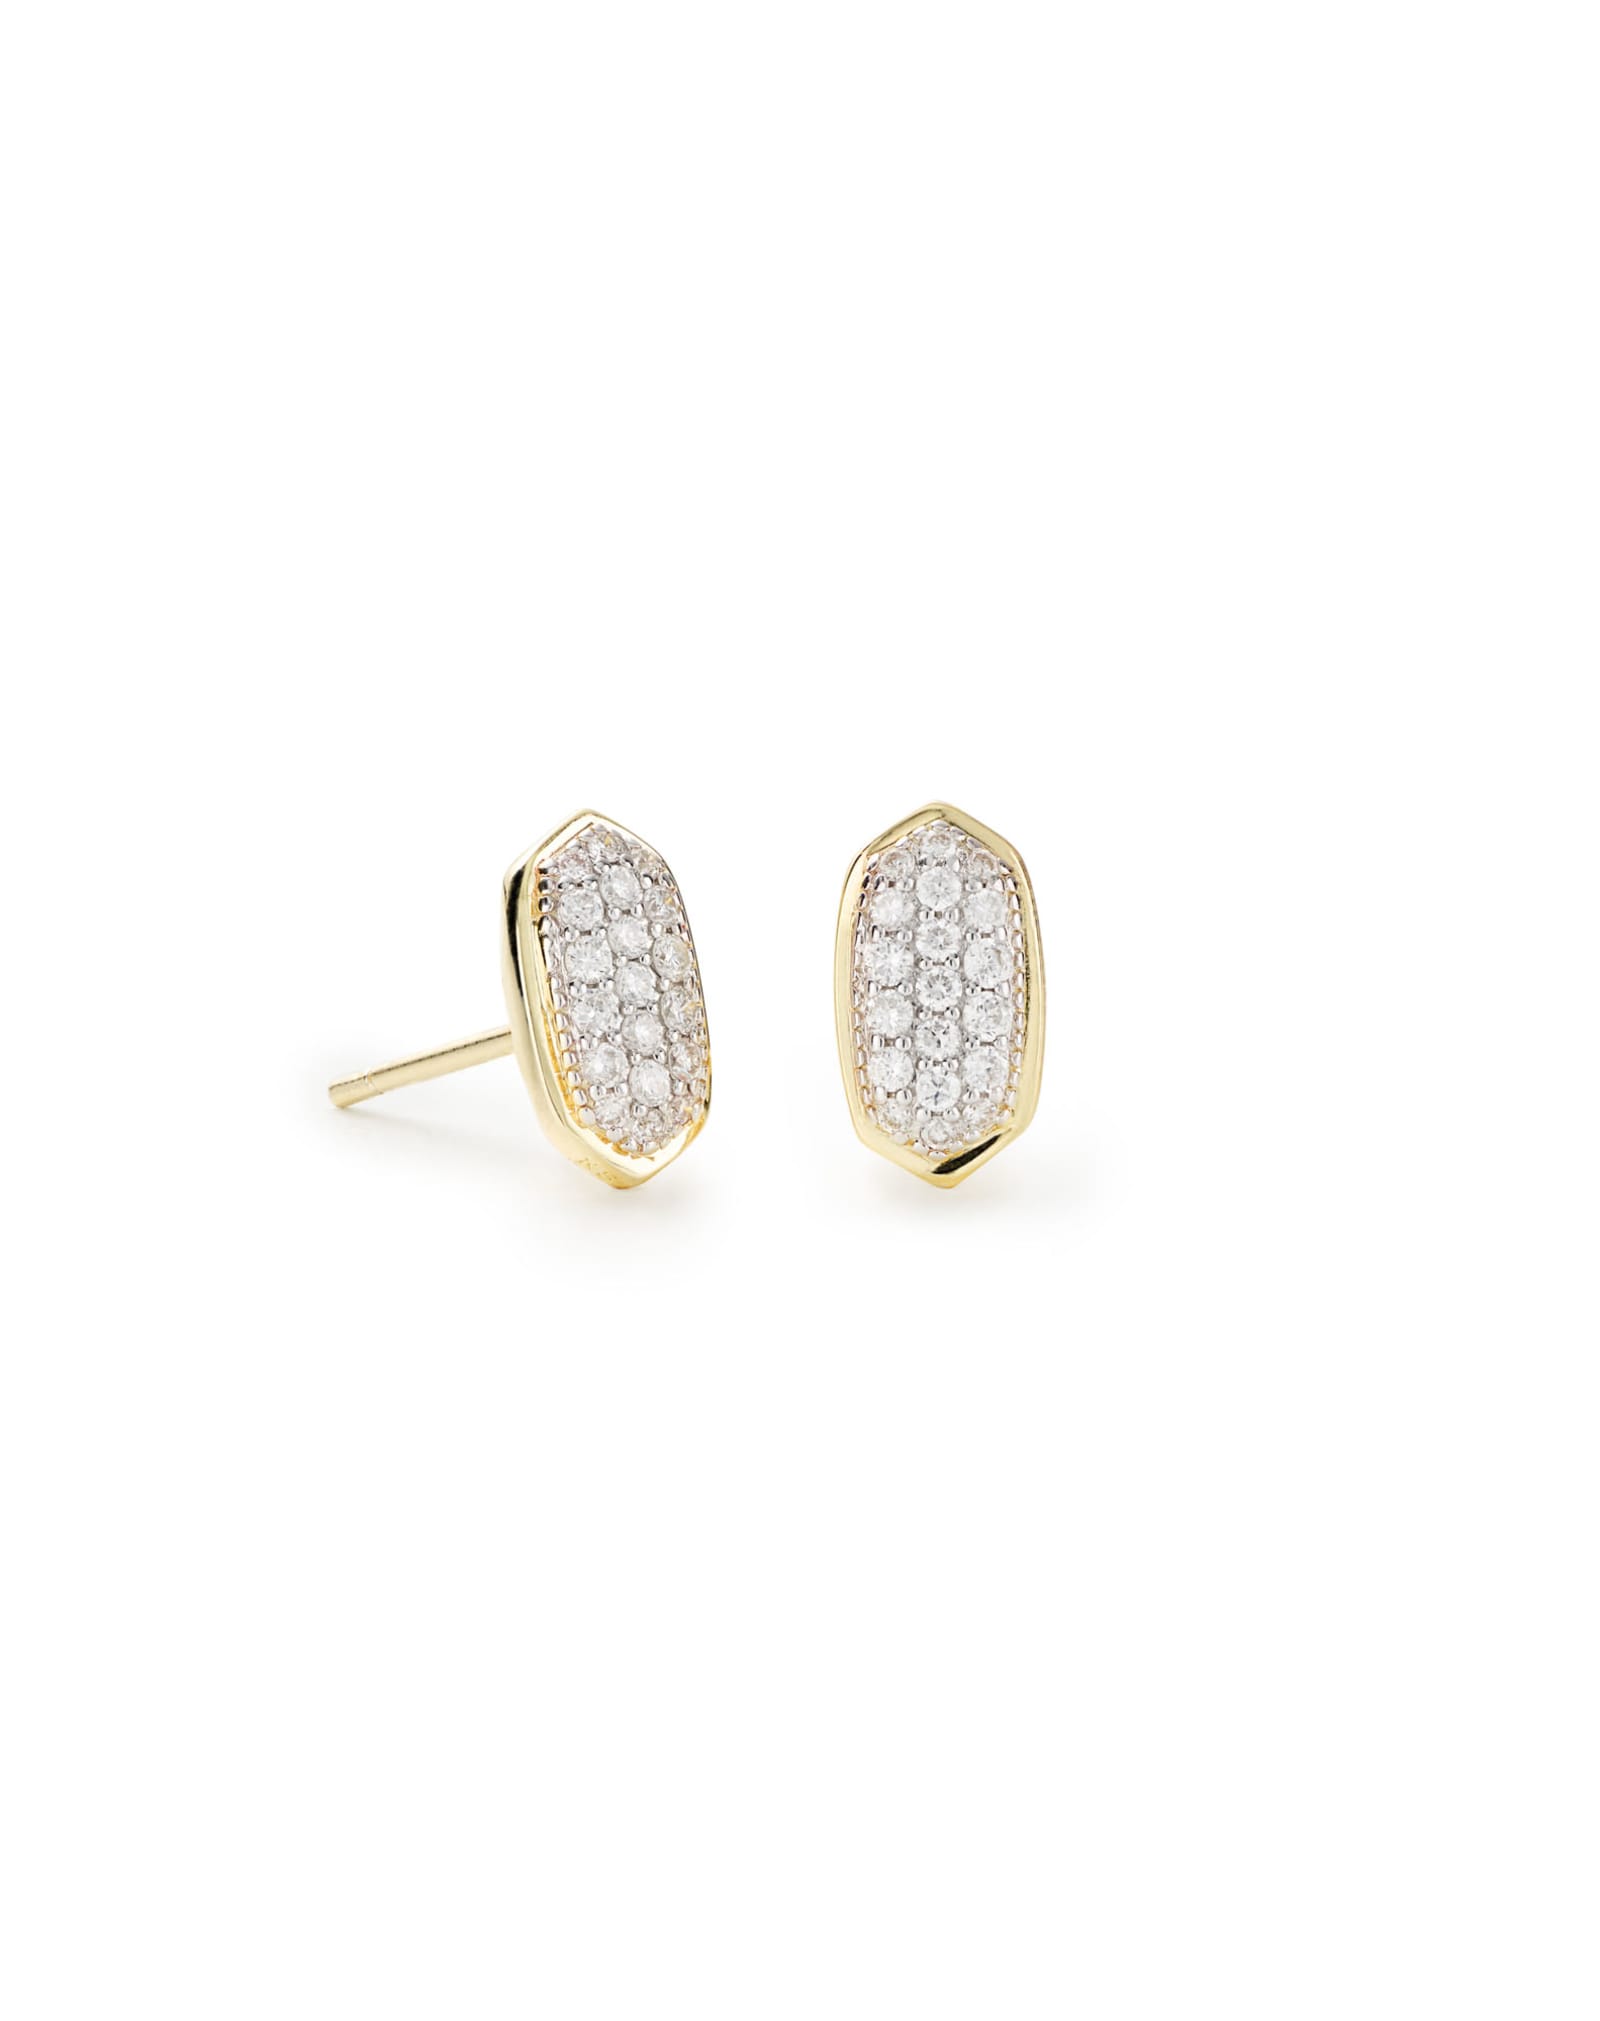 Kendra Scott Amelee Earrings in Pave Diamond and 14k Yellow Gold | Diamonds